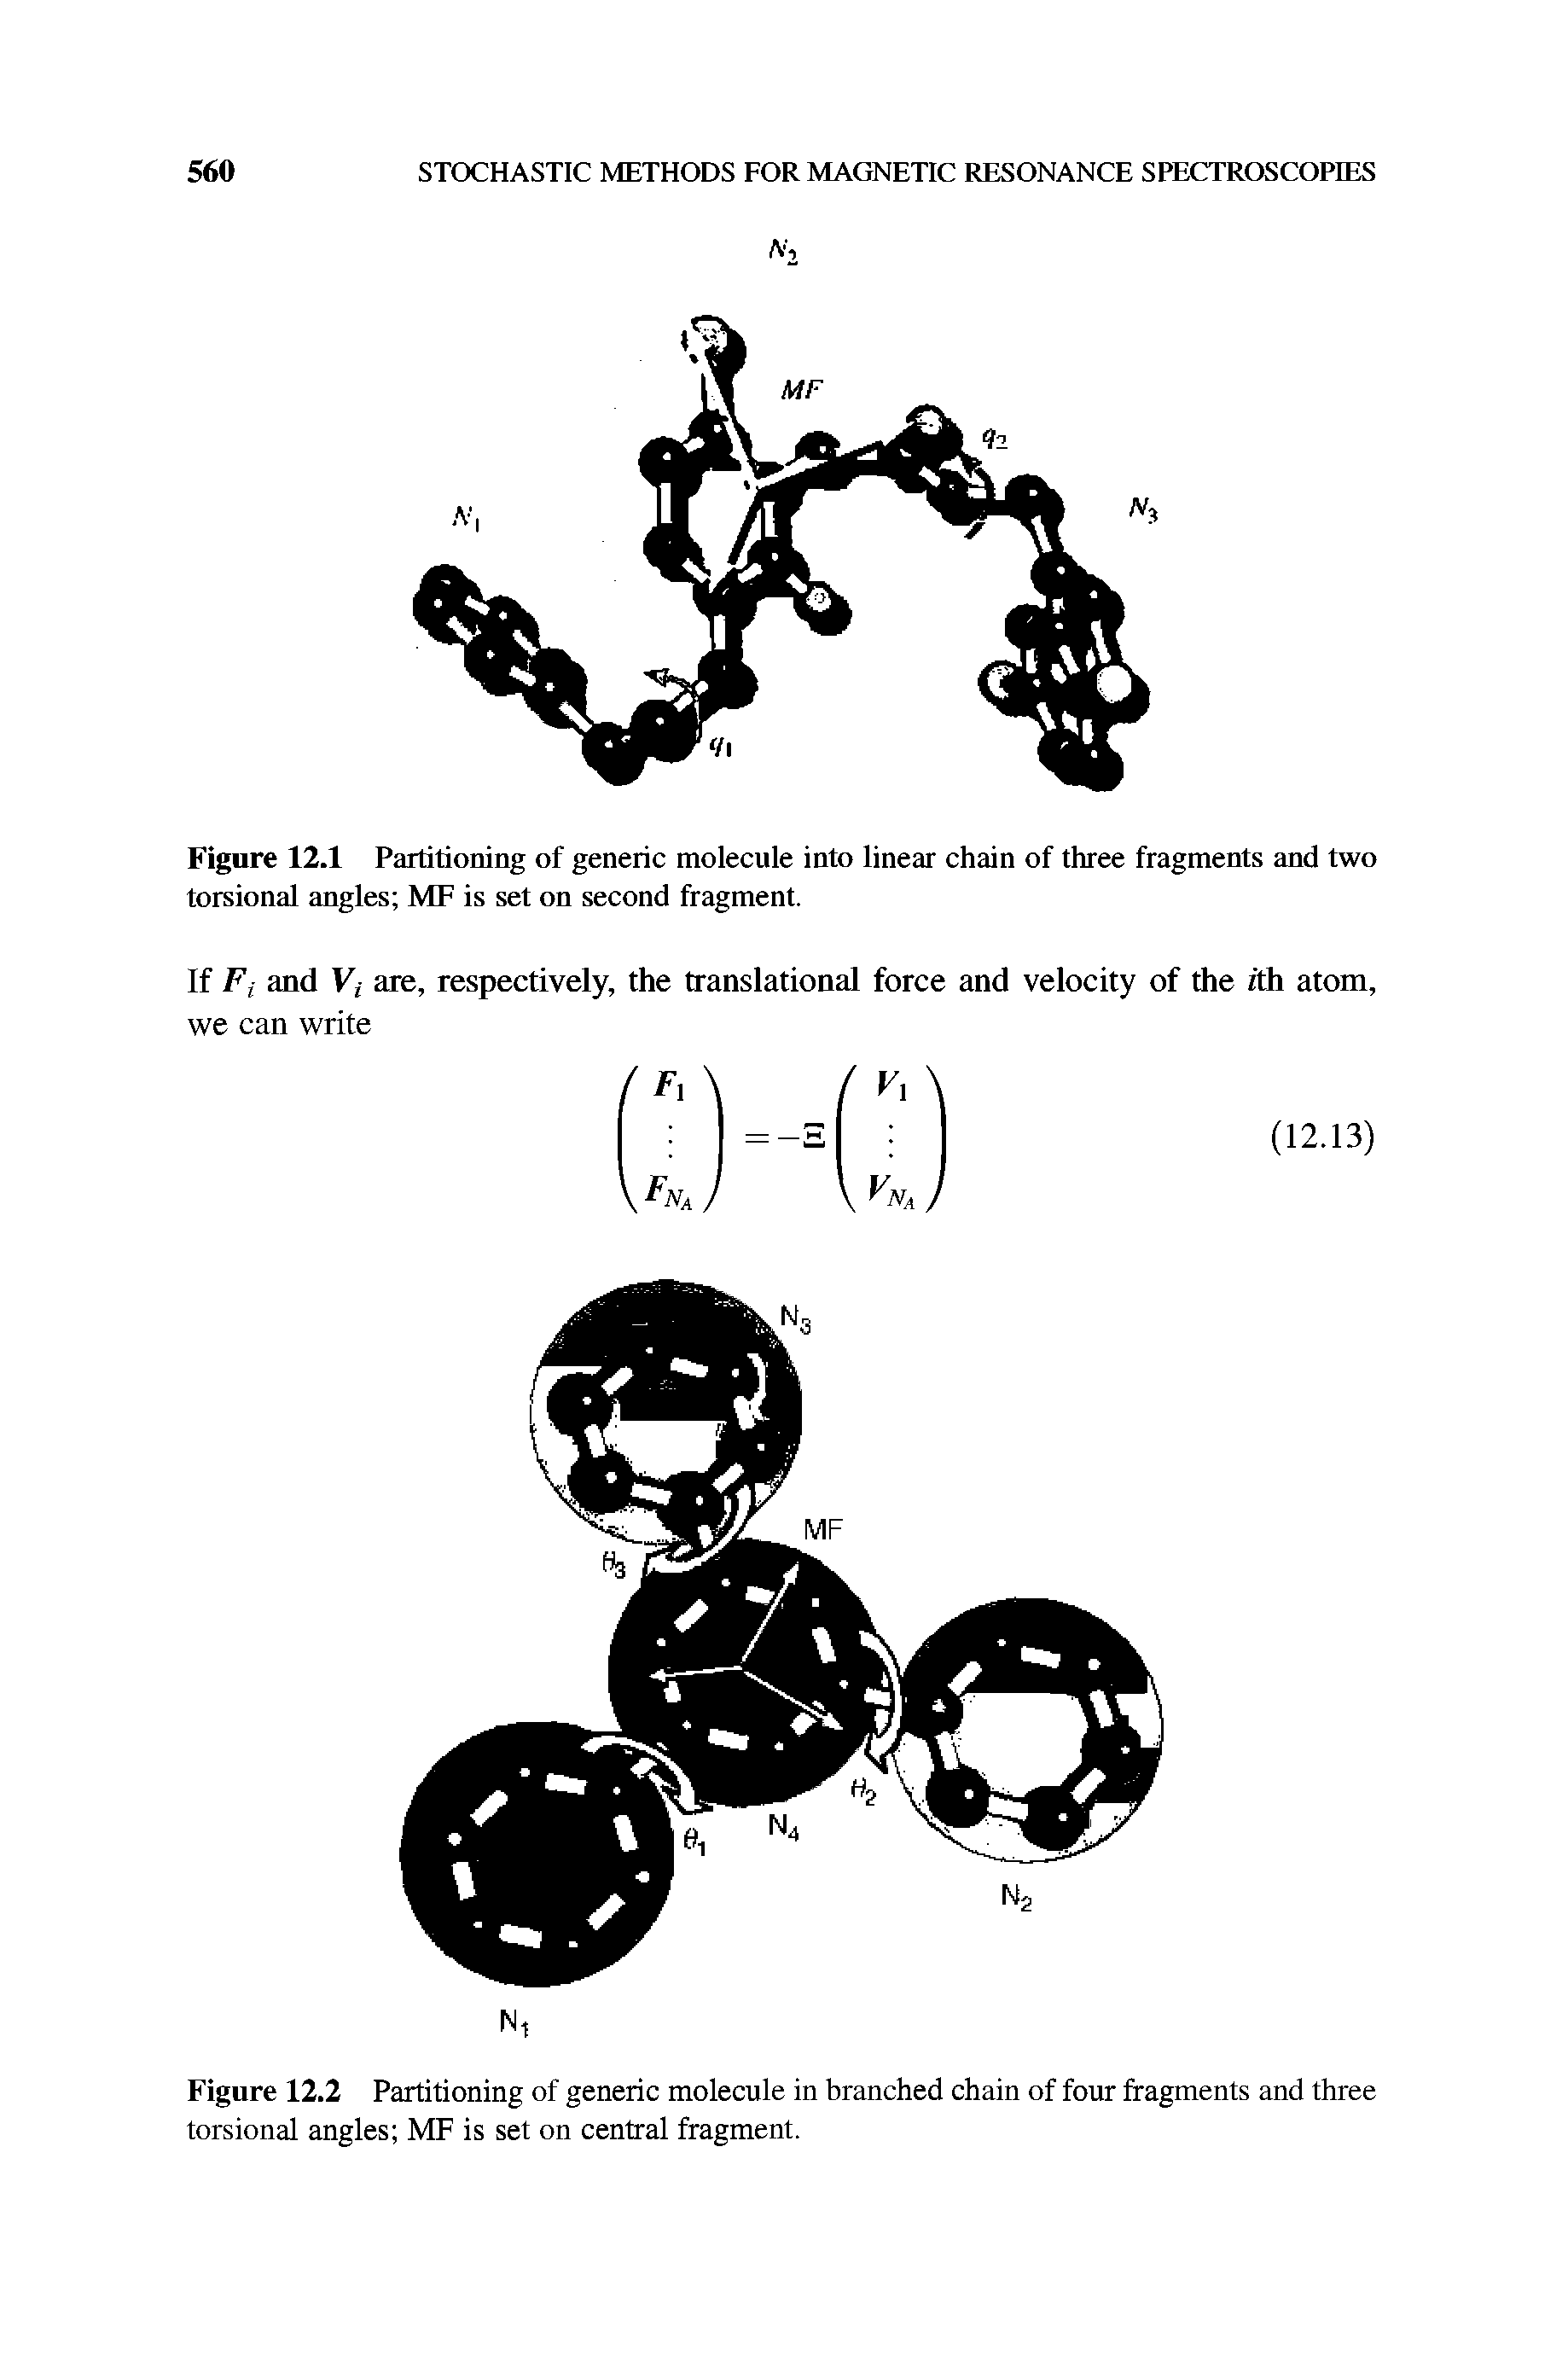 Figure 12.2 Partitioning of generic molecule in branched chain of four fragments and three torsional angles MF is set on central fragment.